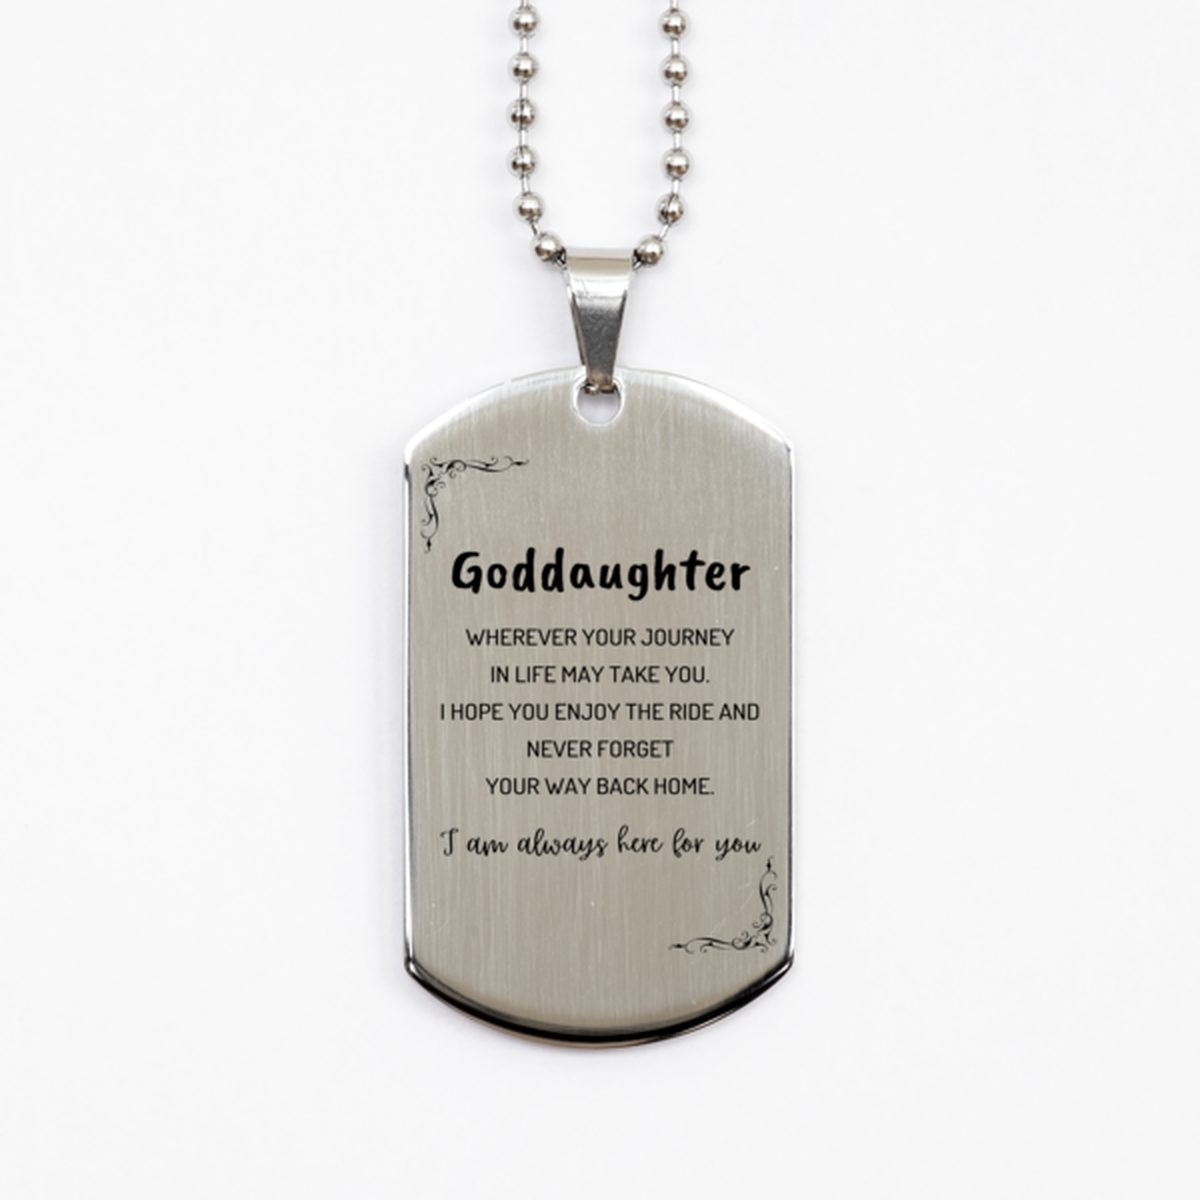 Goddaughter wherever your journey in life may take you, I am always here for you Goddaughter Silver Dog Tag, Awesome Christmas Gifts For Goddaughter, Goddaughter Birthday Gifts for Men Women Family Loved One